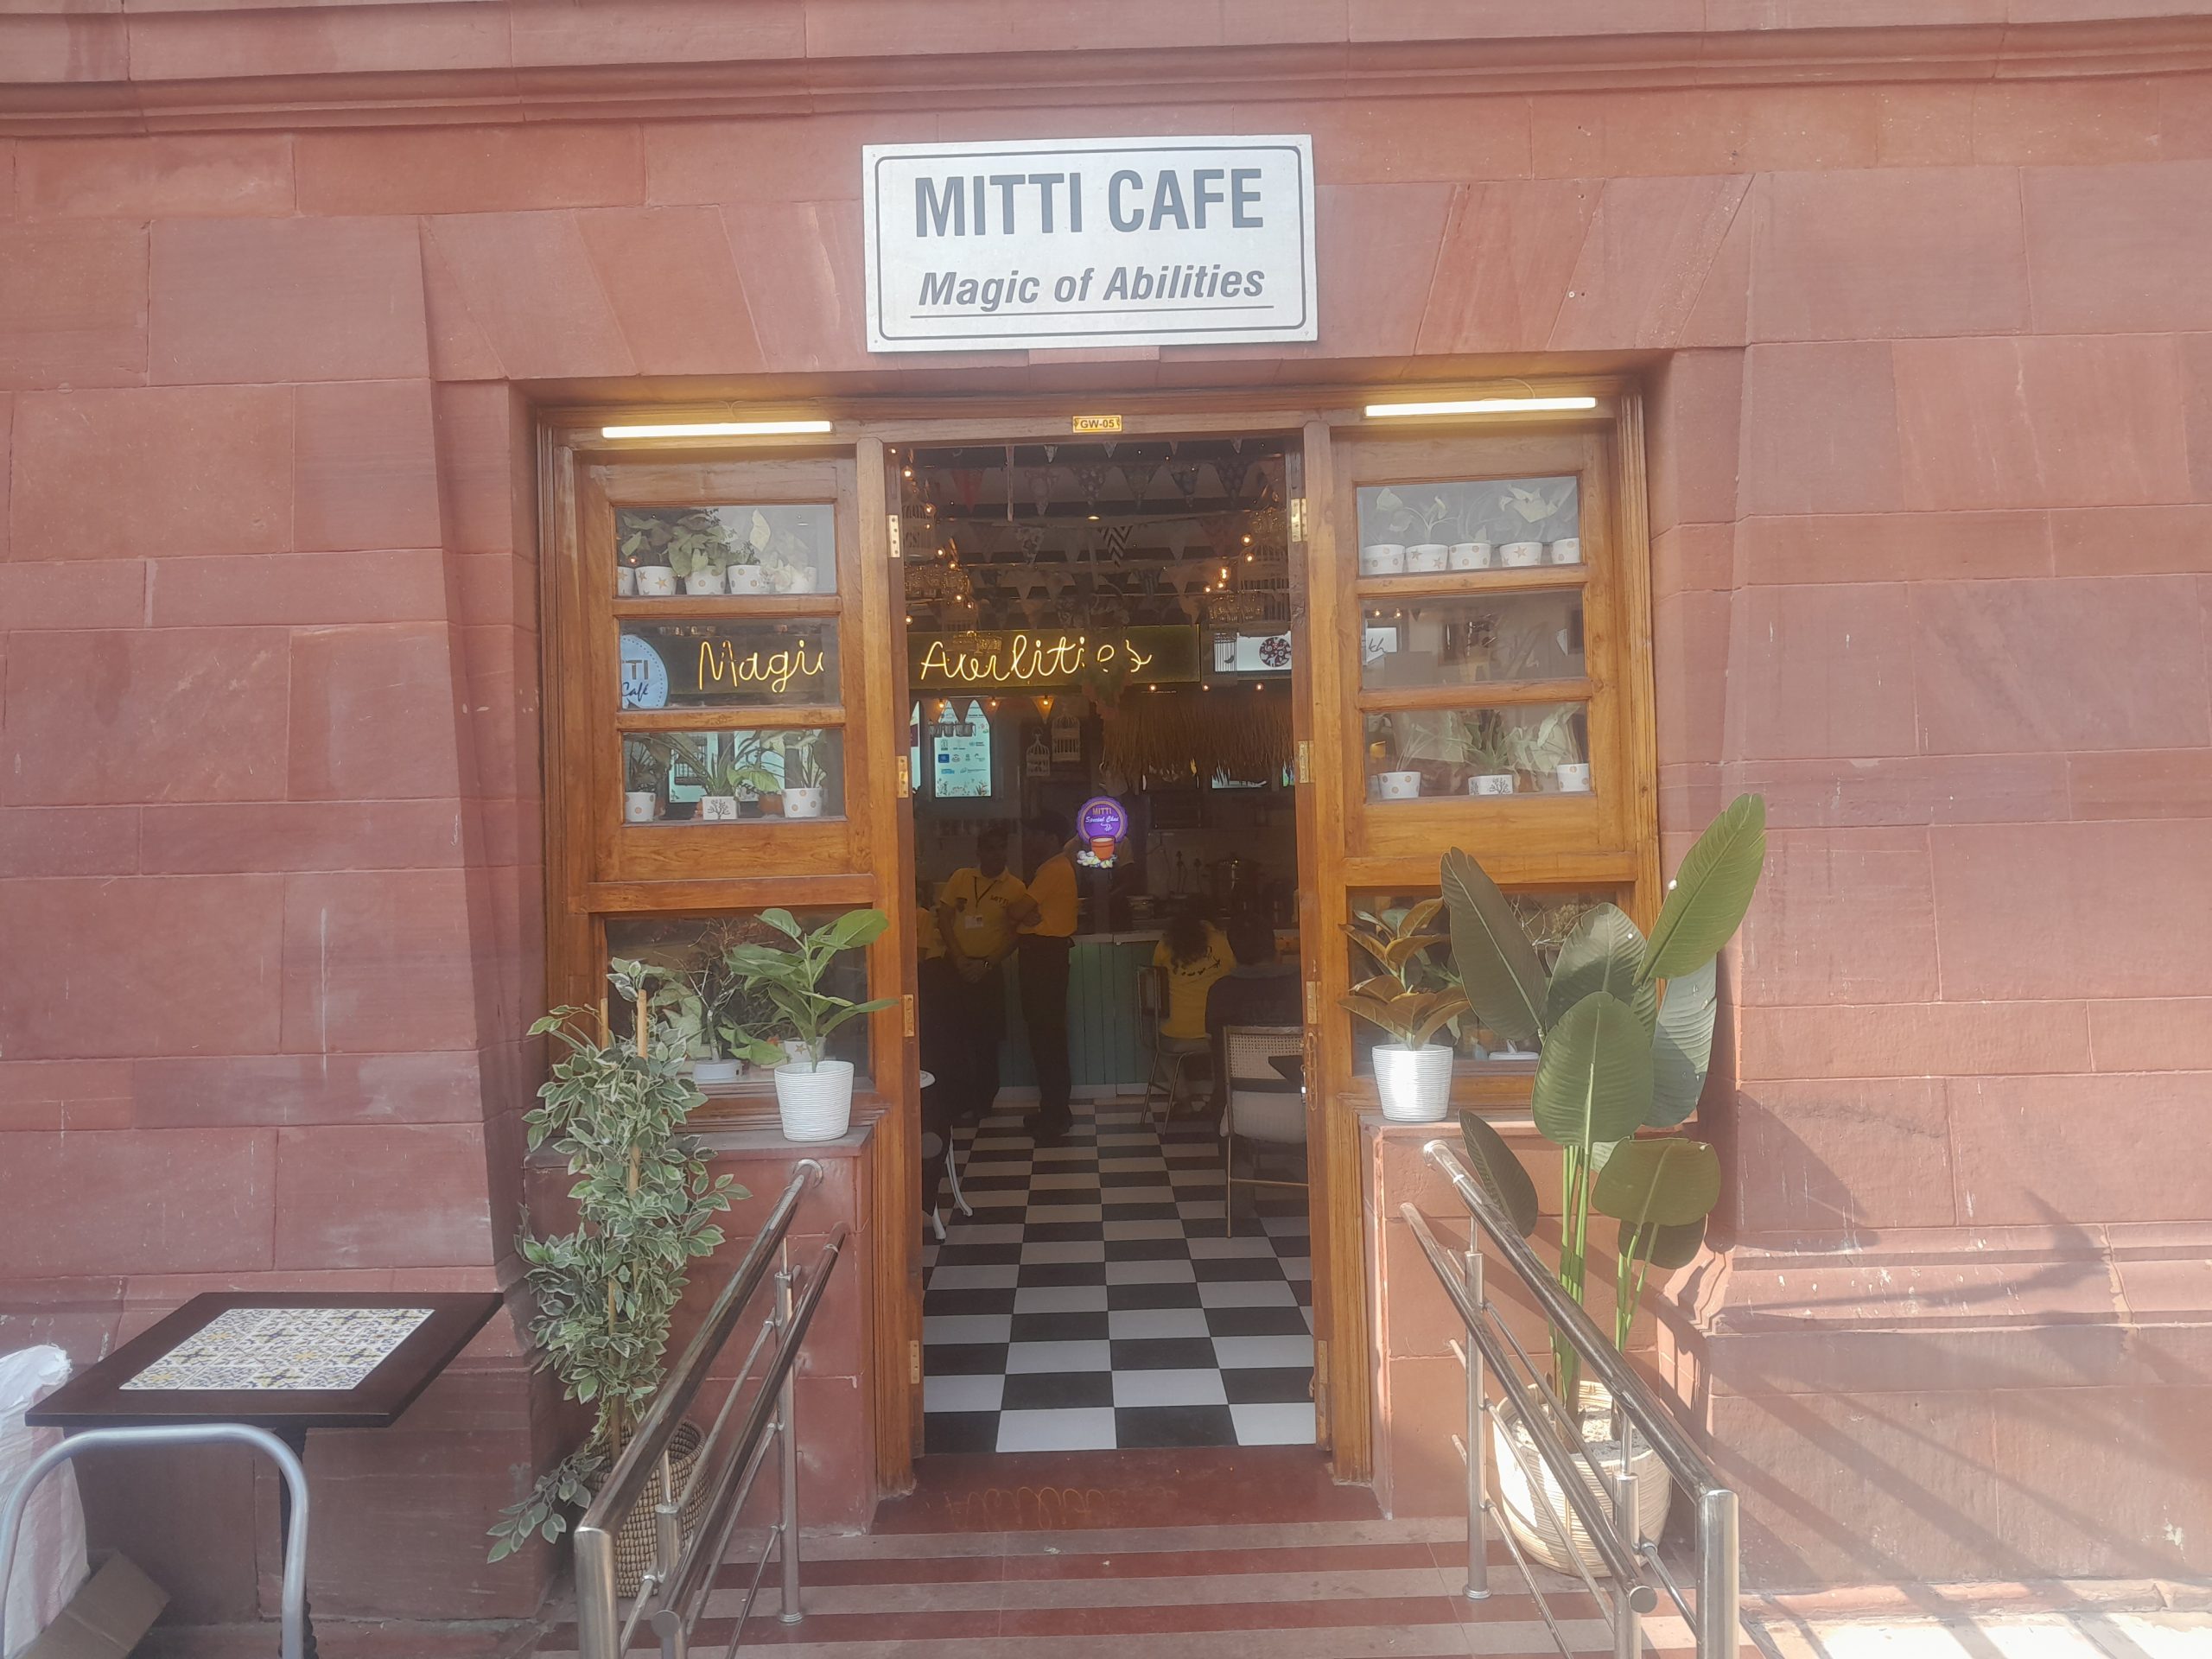 Mitti Café: A place full of hope,smiles and the best kulhad chai